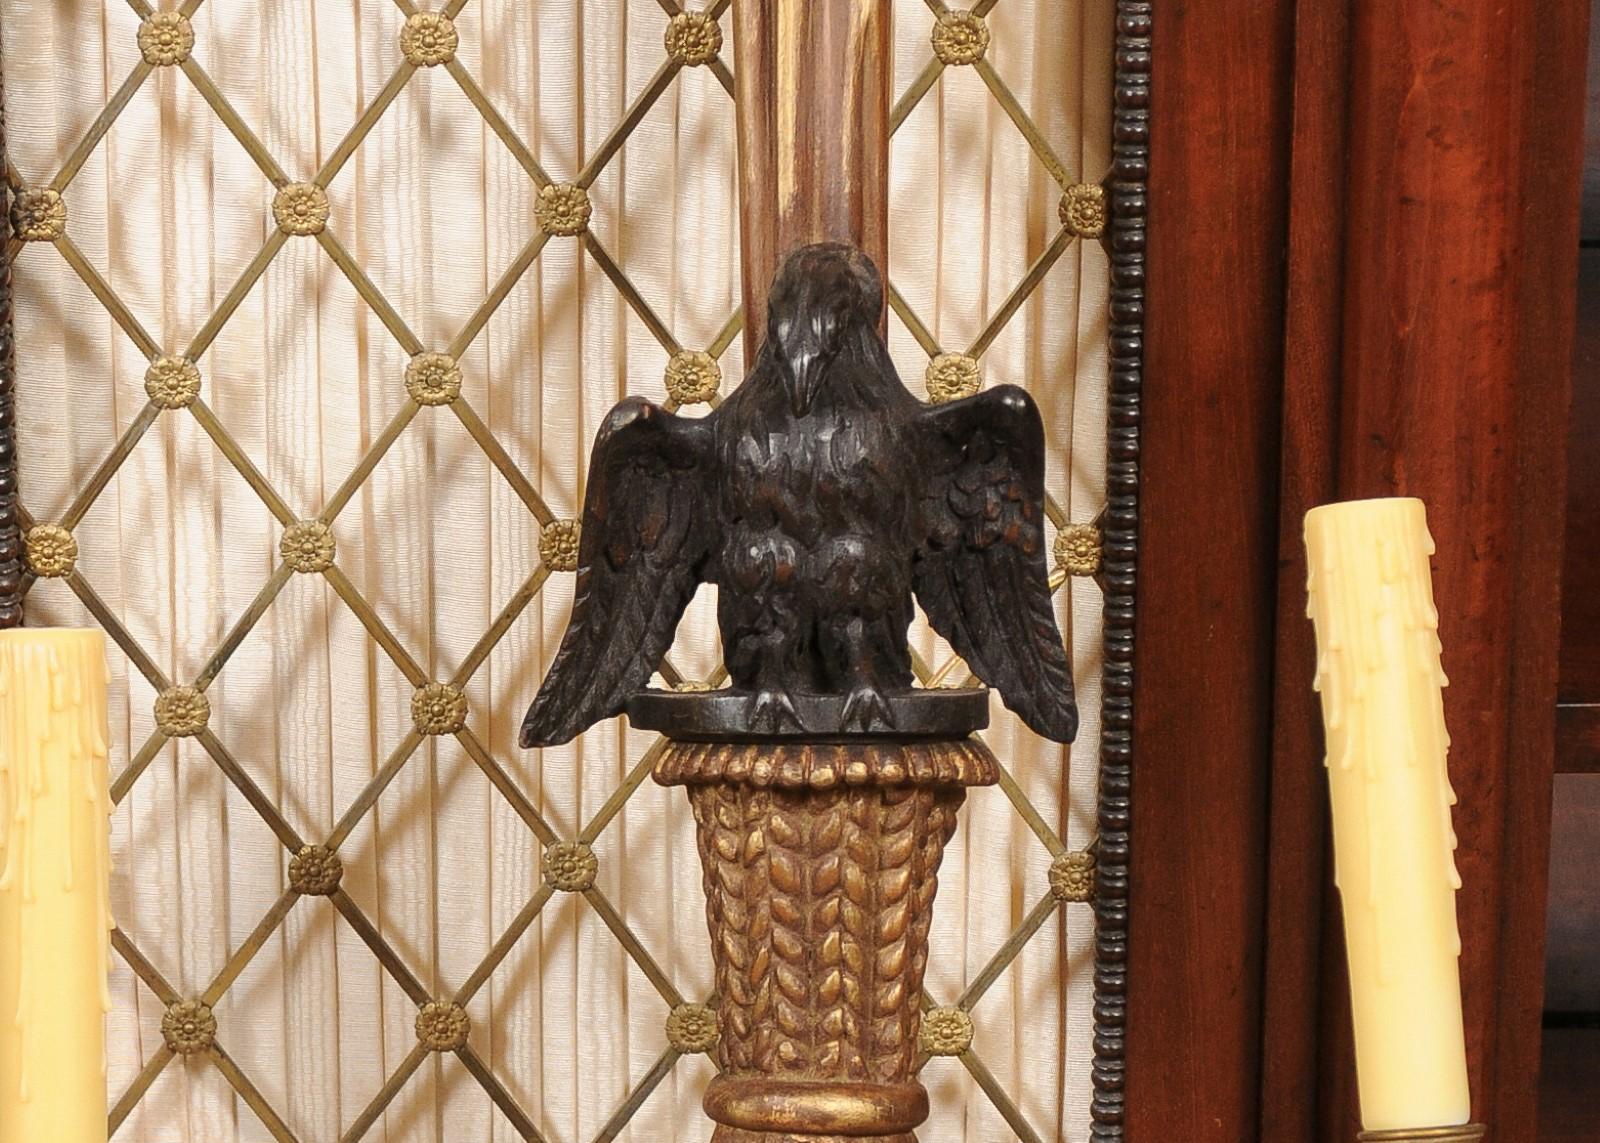  Pair of Giltwood Carved Eagle 2 Light Sconces with Tassle Detail, 20th Century For Sale 4